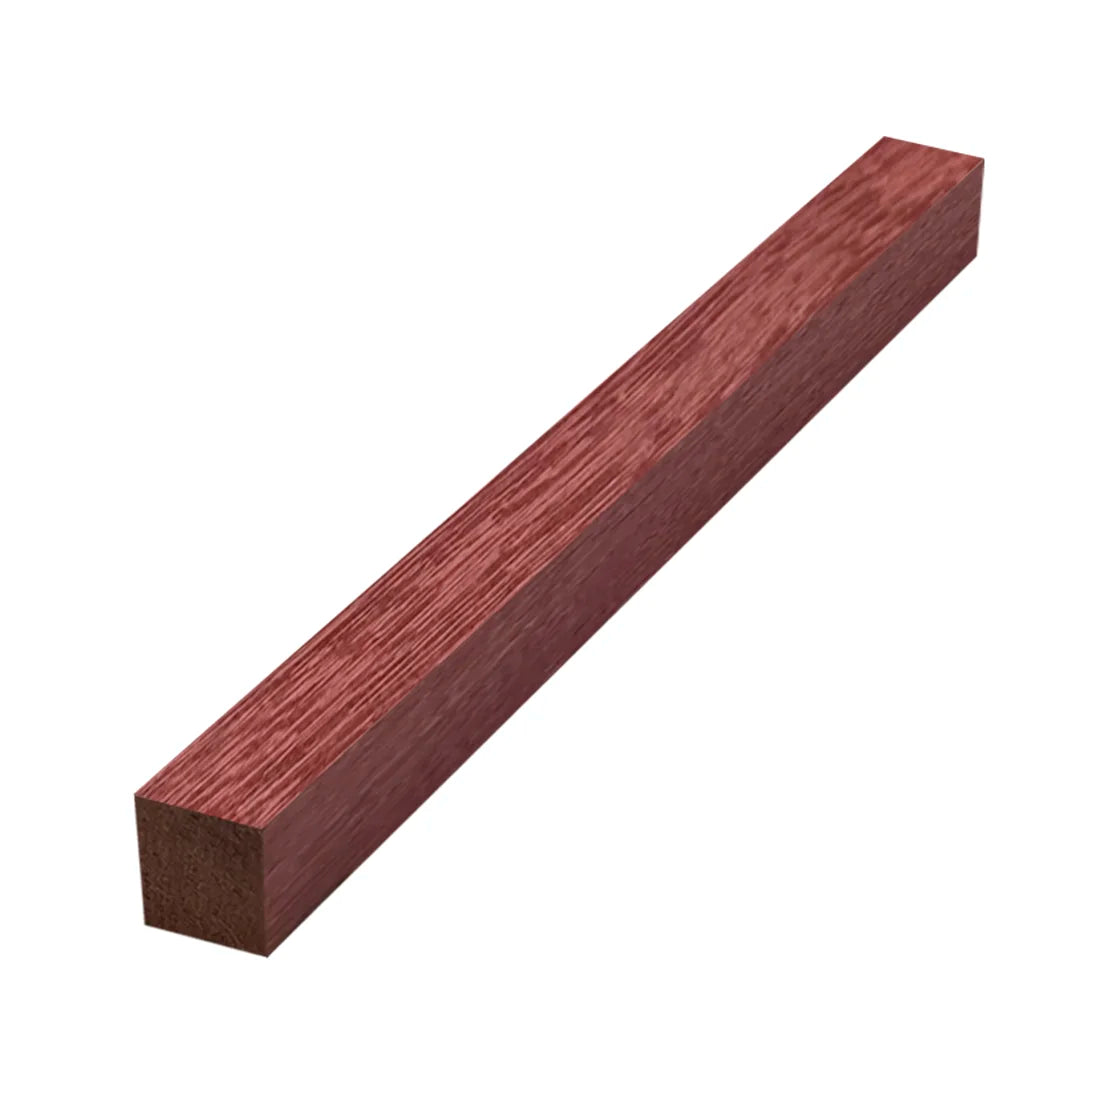 Purpleheart Hobby Wood/ Turning Wood Blanks 1 x 1 x 12 inches - Exotic Wood Zone - Buy online Across USA 